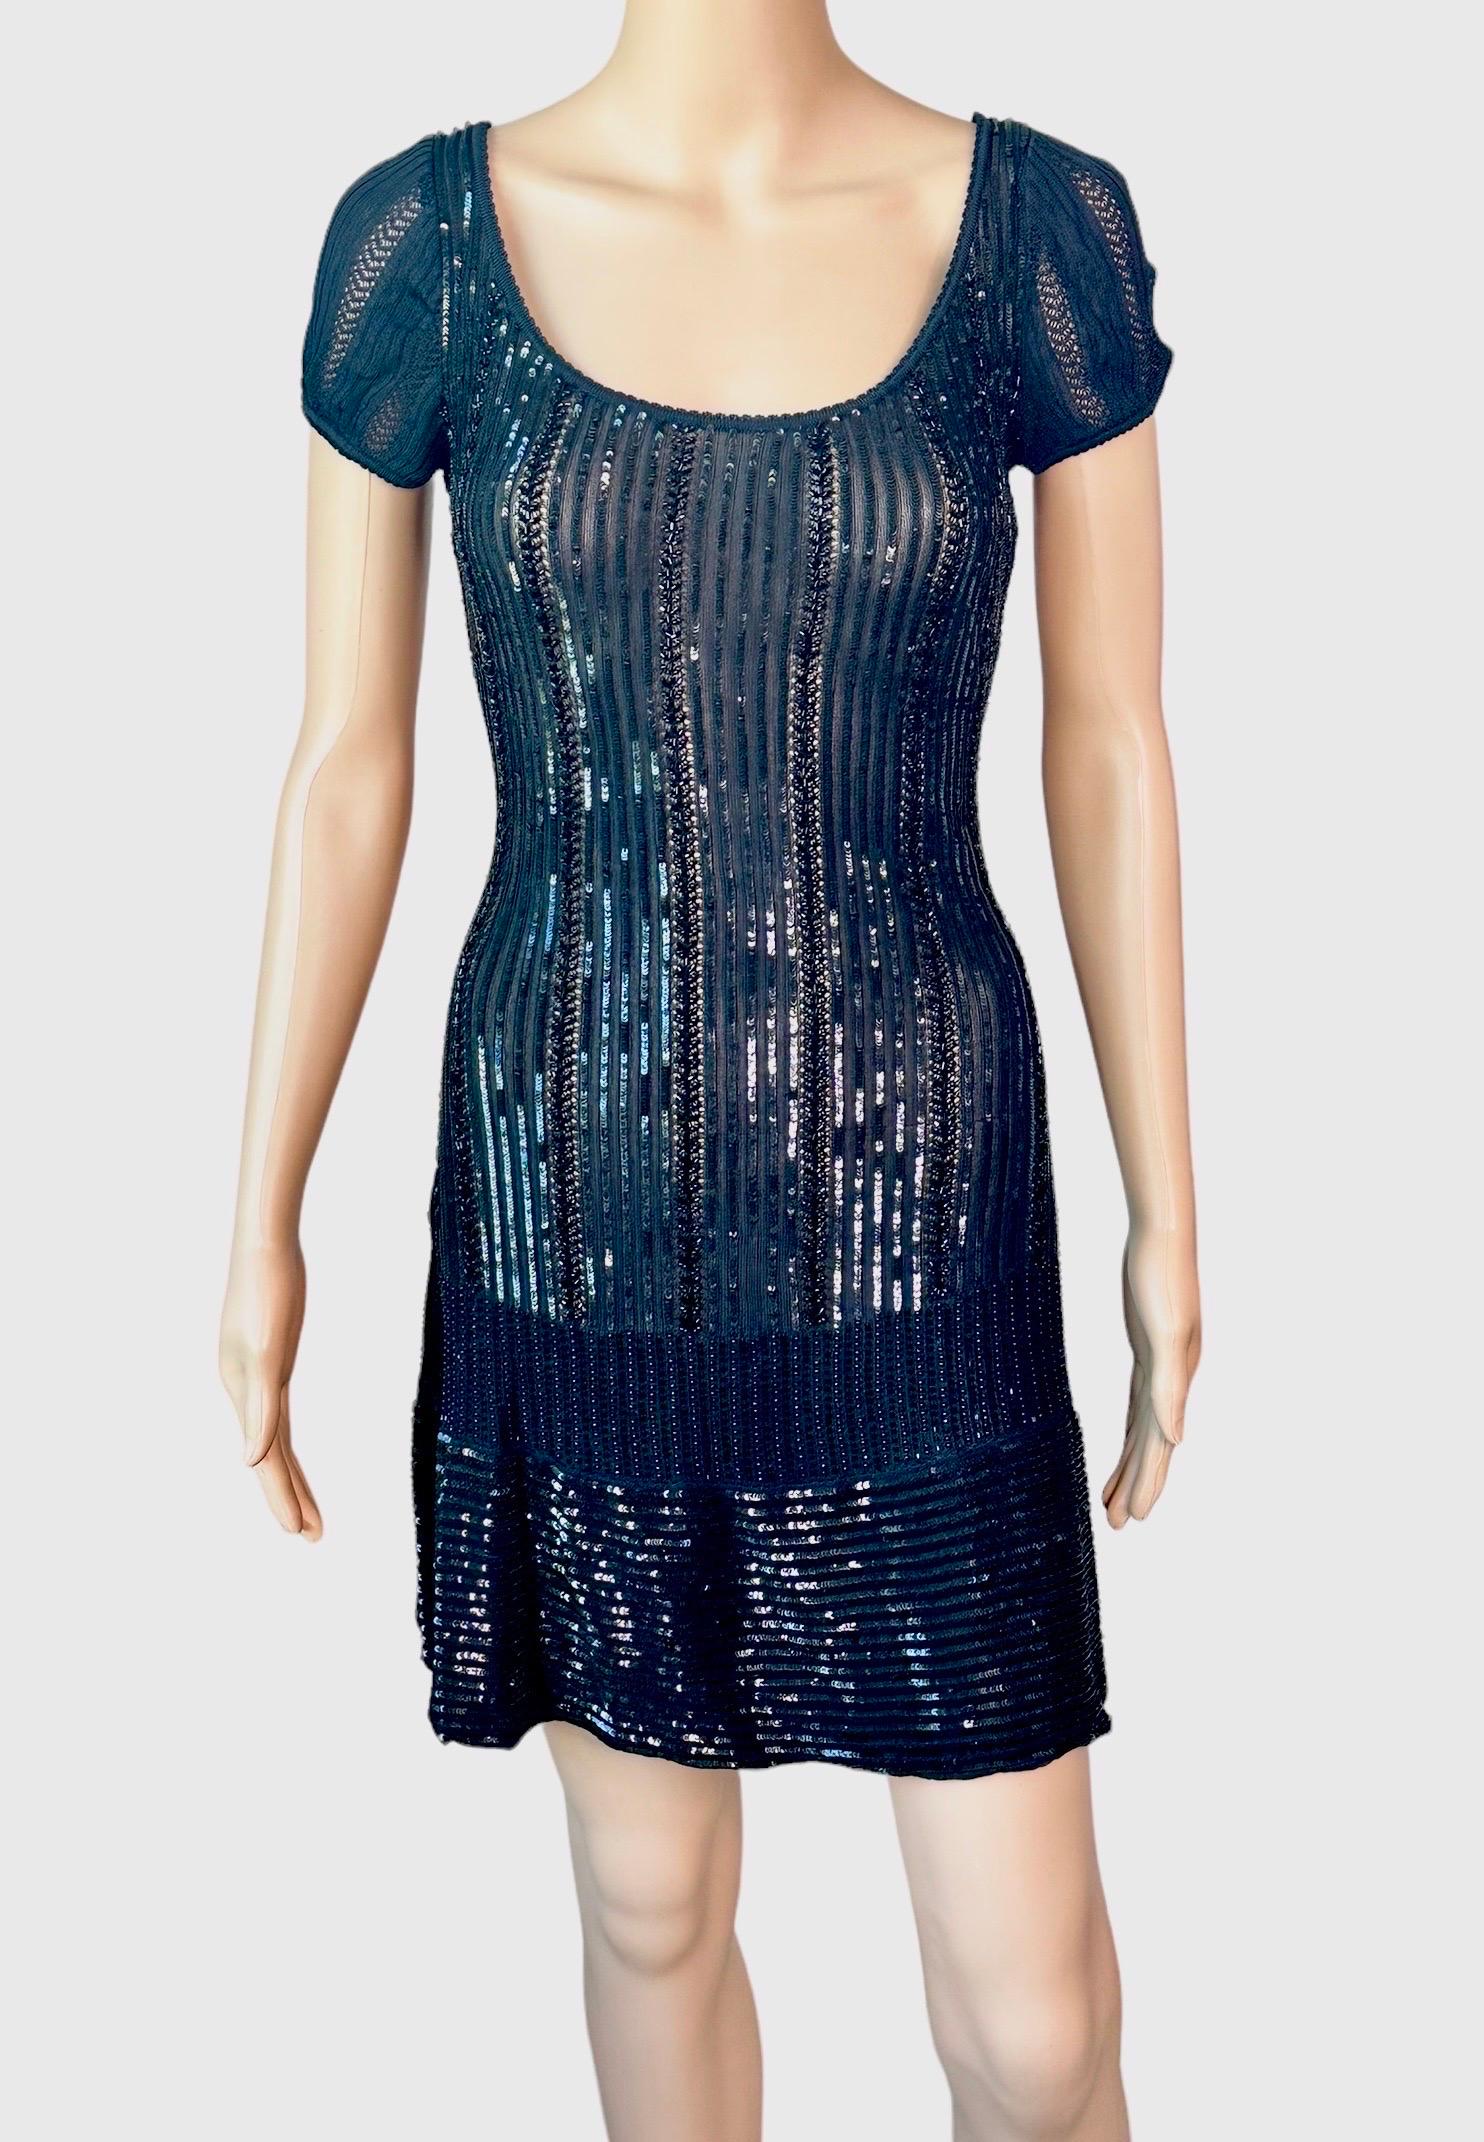 Azzedine Alaia Vintage S/S 1996 Black Sequin Beaded Embellished Mini Dress Size M

Black vintage Alaïa beaded dress featuring bead and sequin embellishments throughout and scoop neck.



